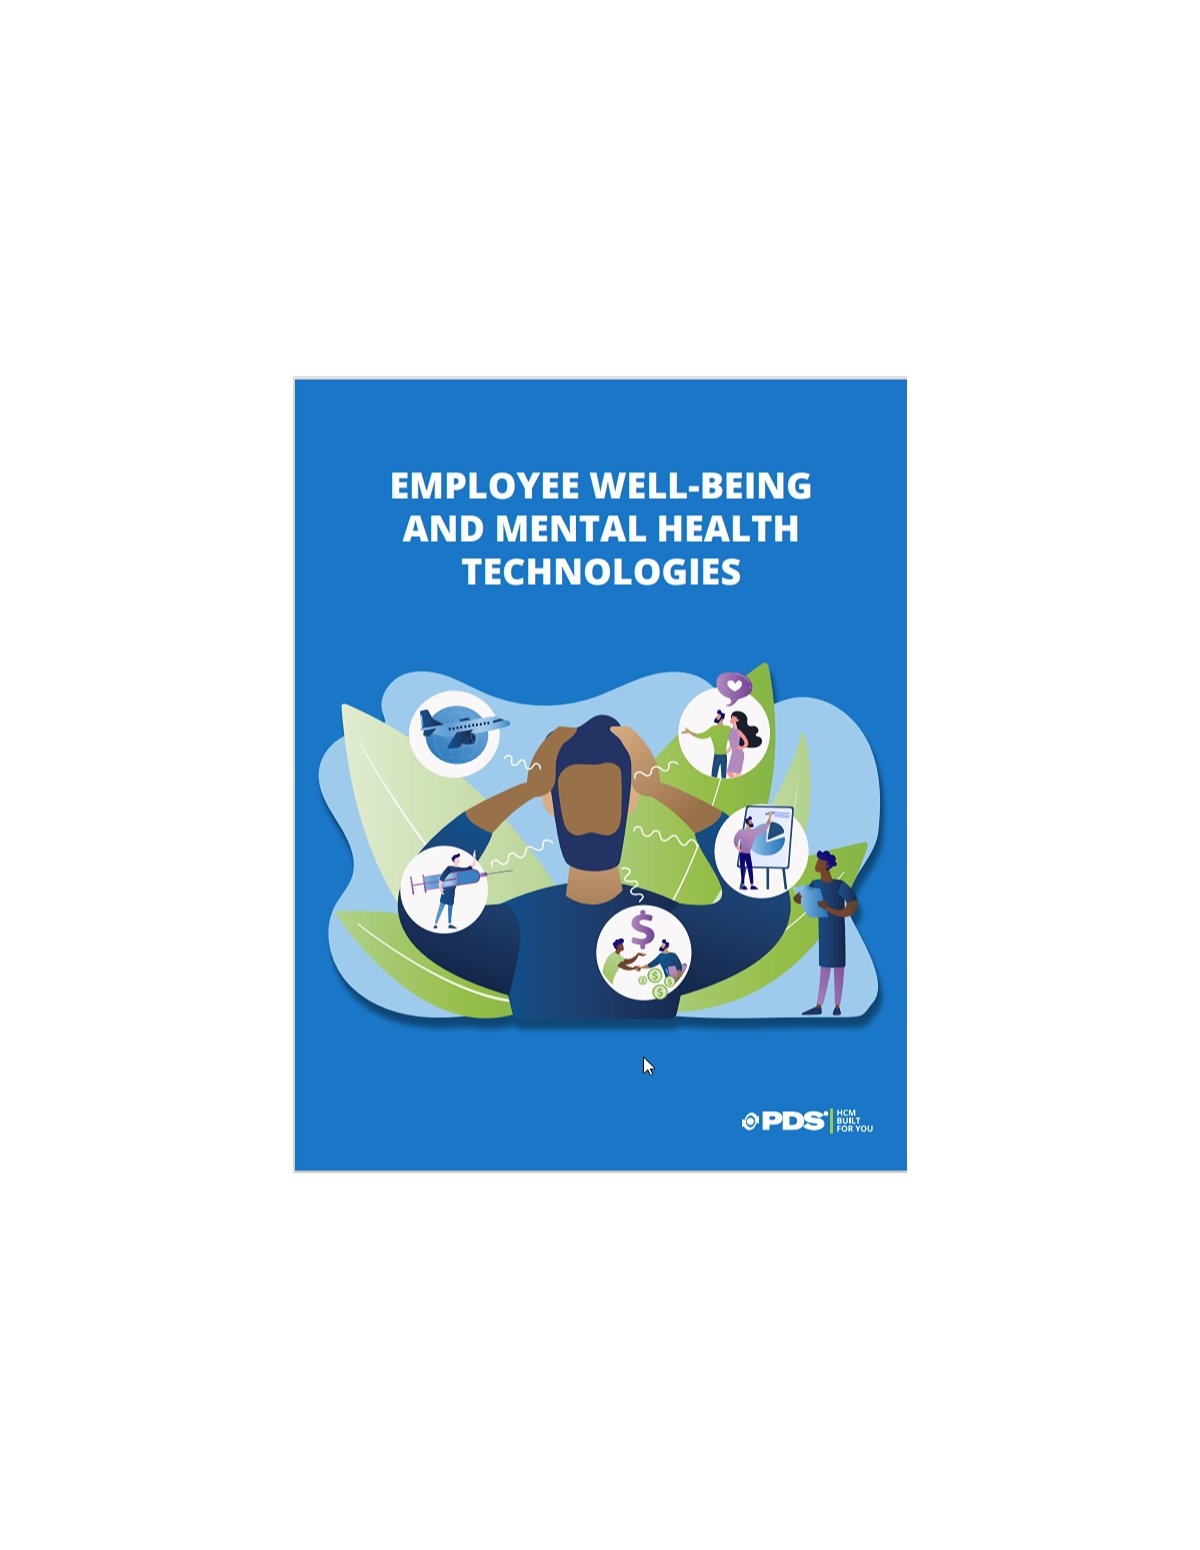 Employee Well-Being and Mental Health Technologies